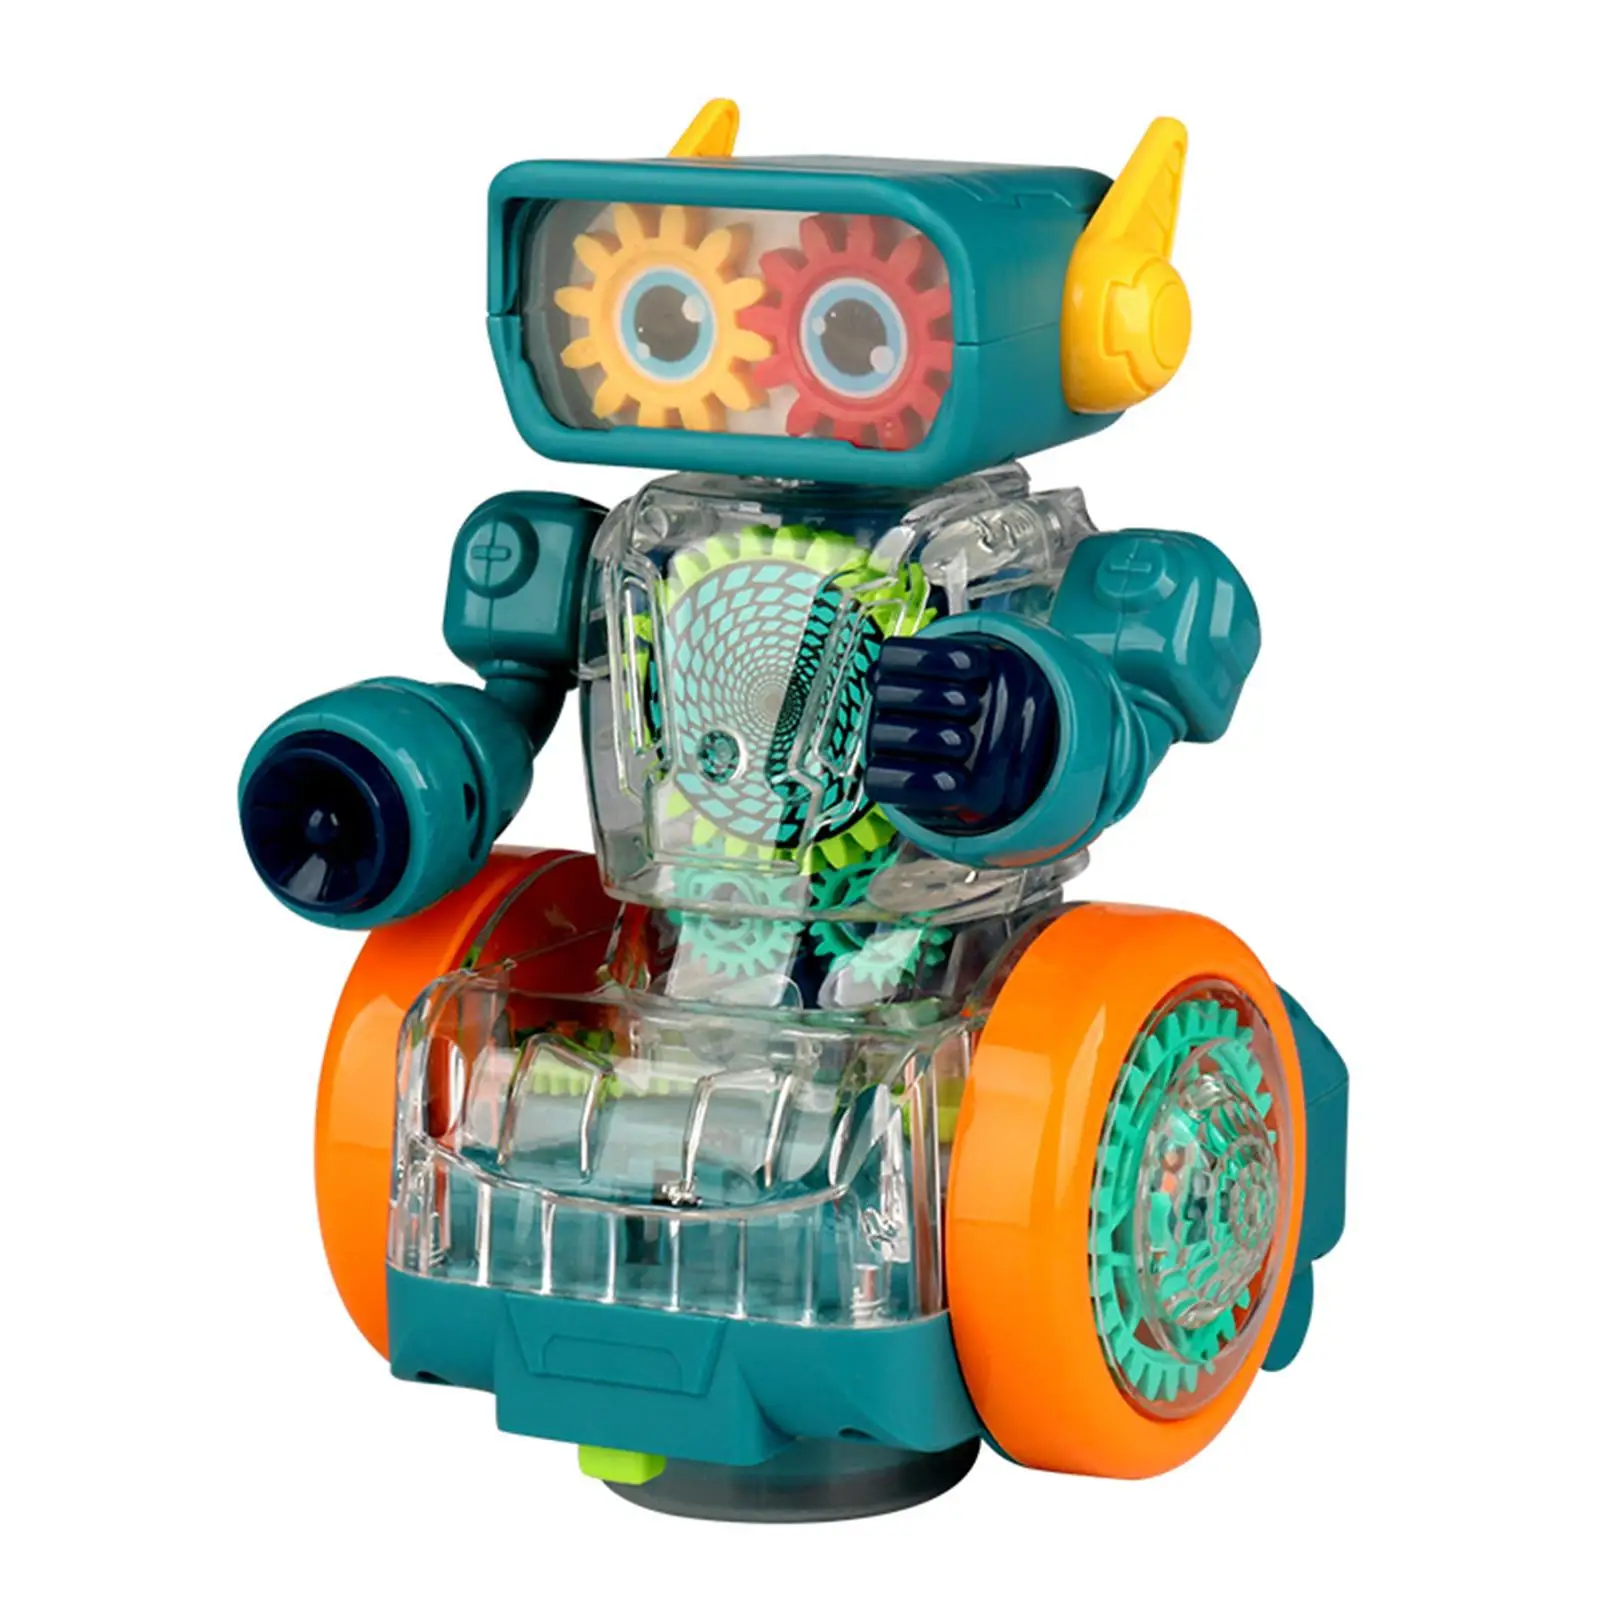 Mechanical Gear Robot Toy Fine Motor Skills with Lighting Developmental Toys Early Educational Toys for Boys Kids Holiday Gifts